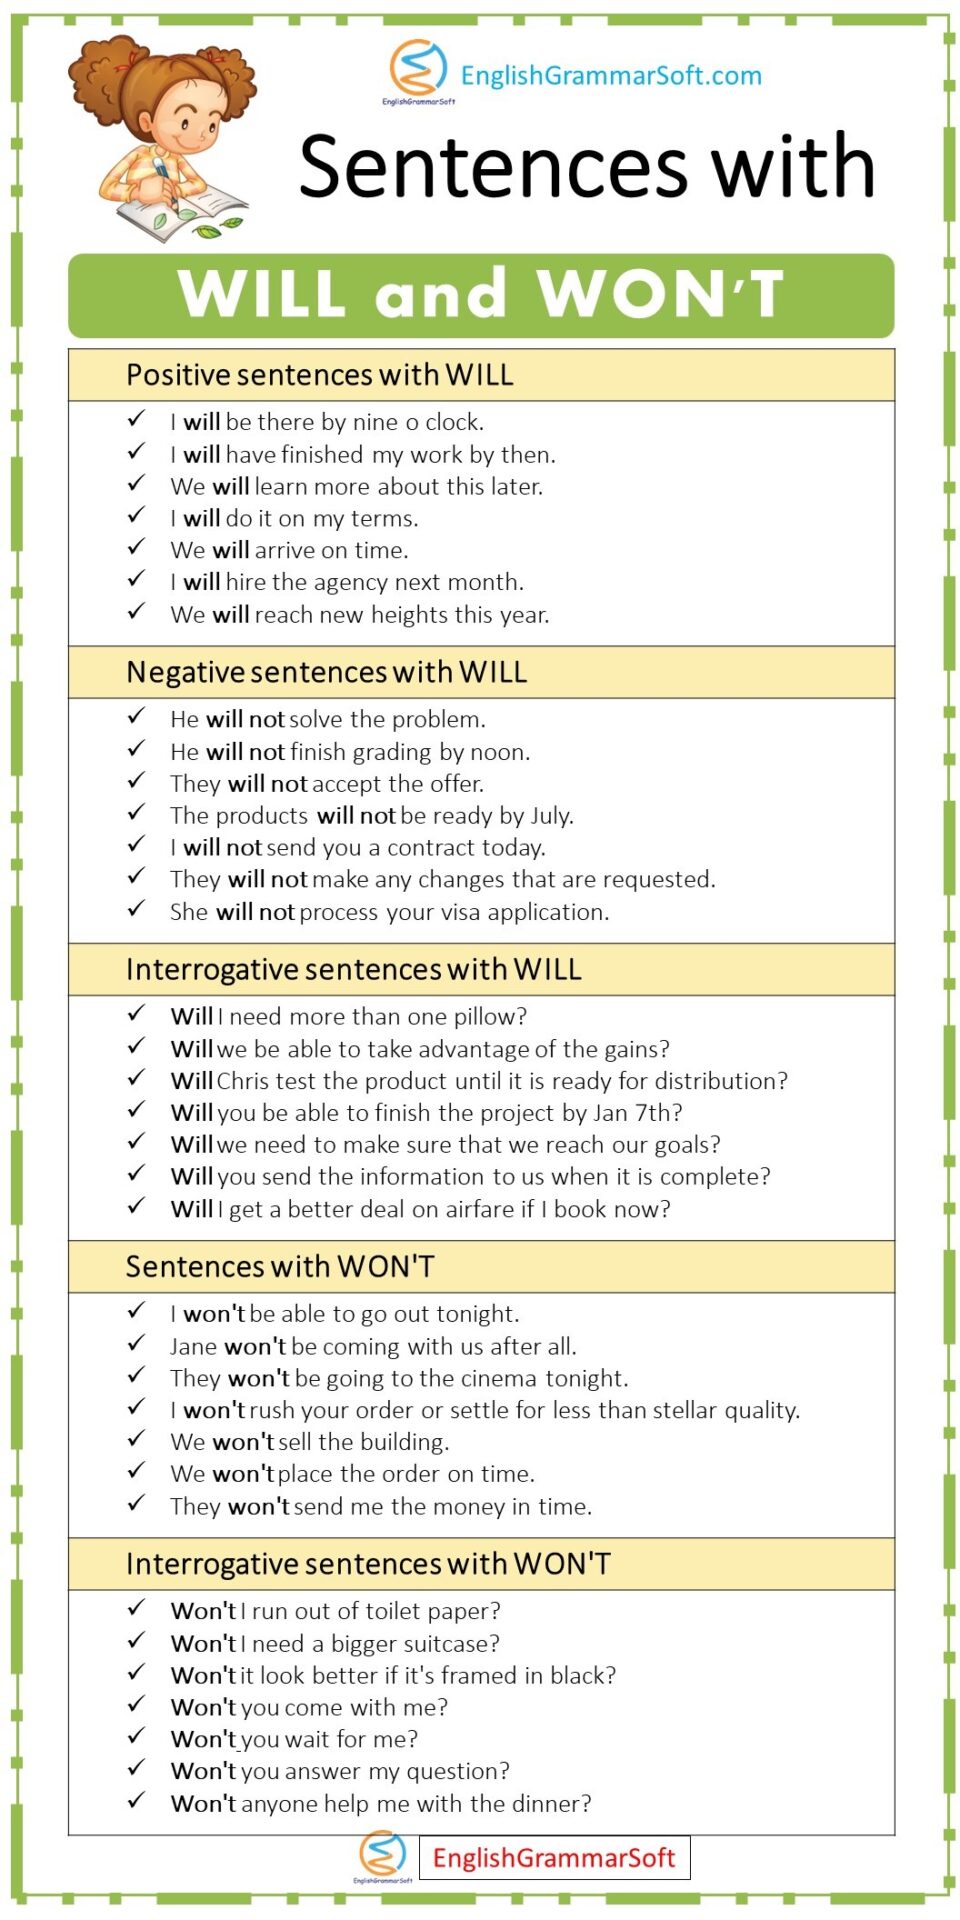 Sentences with WILL and WON'T